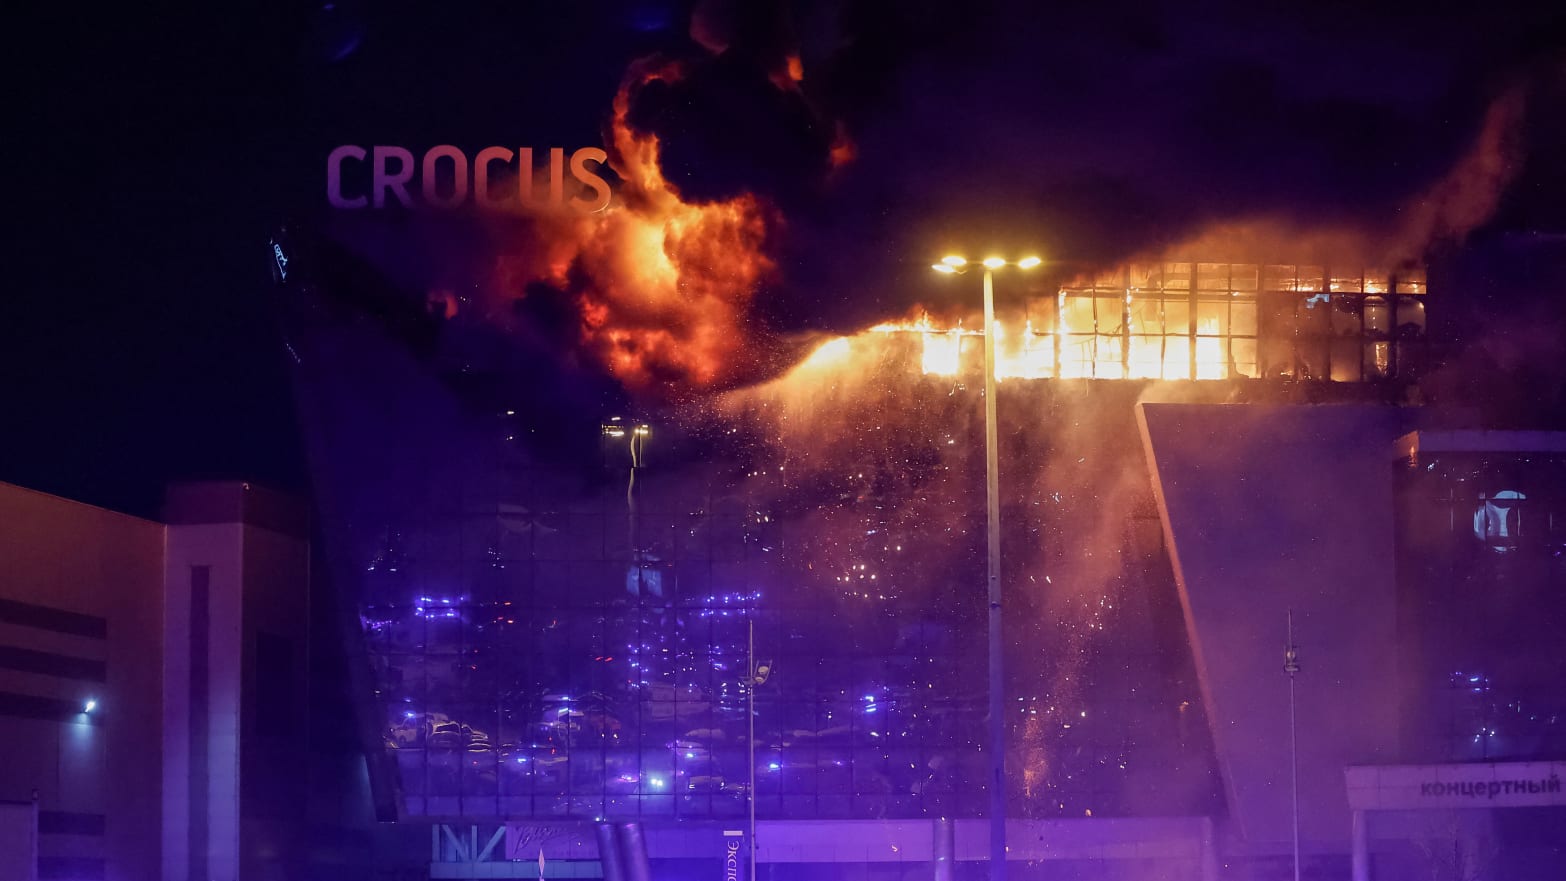 Crocus City Hall near Moscow in the aftermath of a deadly attack.